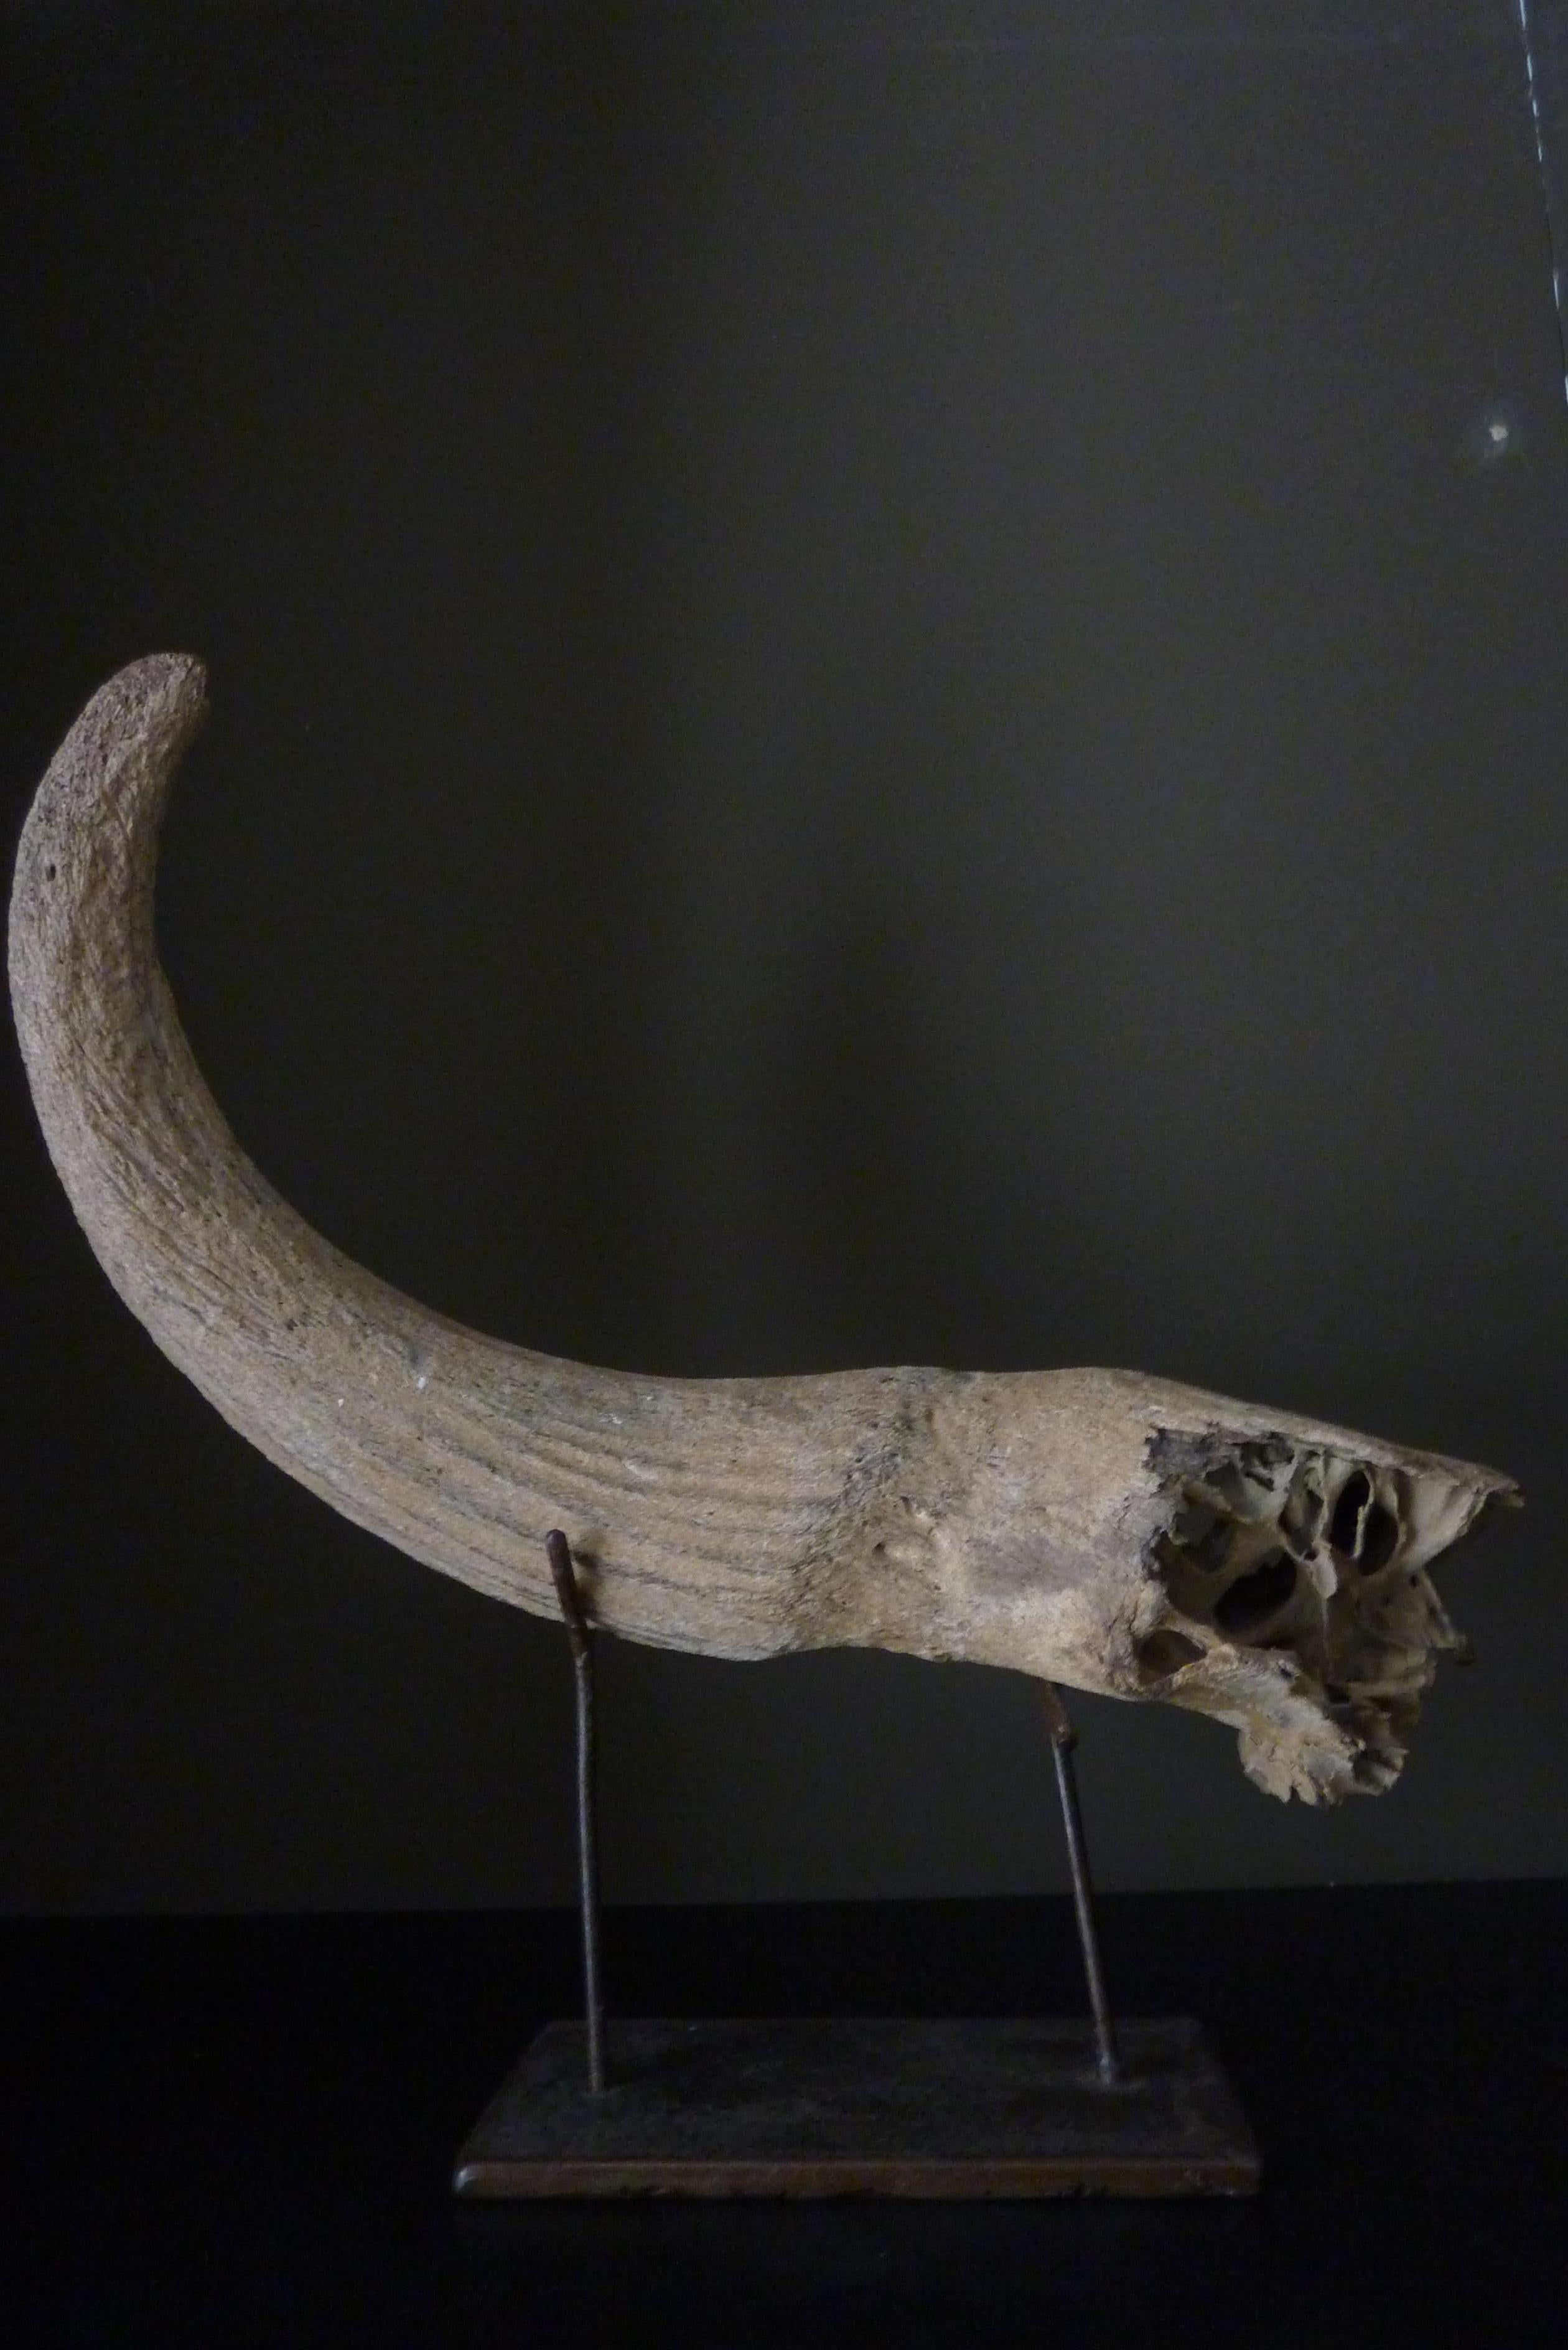 Fossil Steppe Bison horn with skull piece (Bison Priscus)
A fosile of a Steppe Bison Horn, Bison Priscus.
The Bison Priscus lived in the Pleistocene between 250.000 and 10.000 years ago.
This horn is one of the 80 Bison from a discovered mass